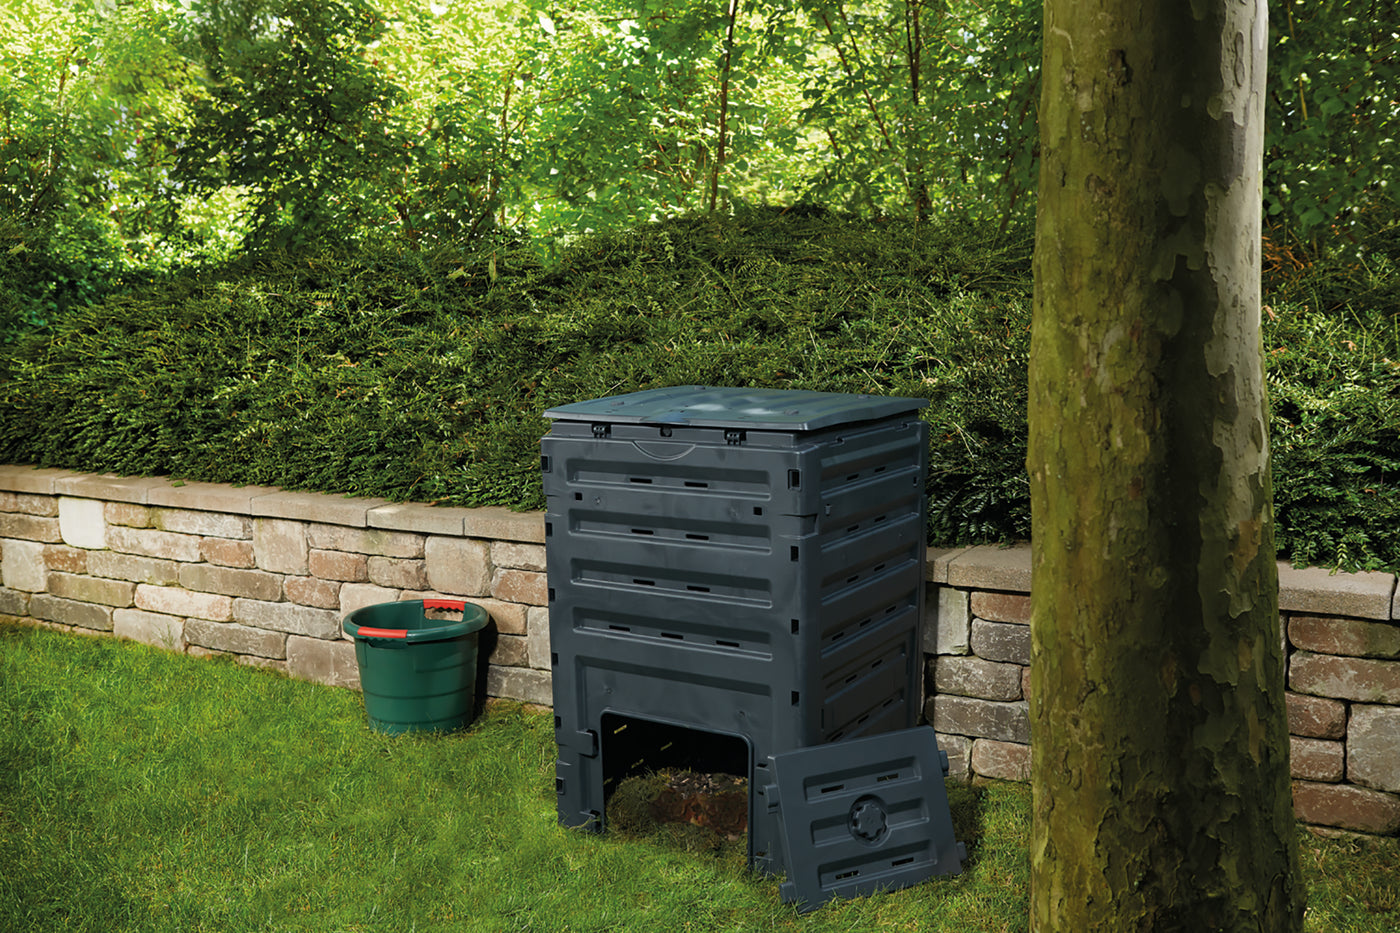 ECO-master 450 liters/120 gal black Composter - Made in Germany